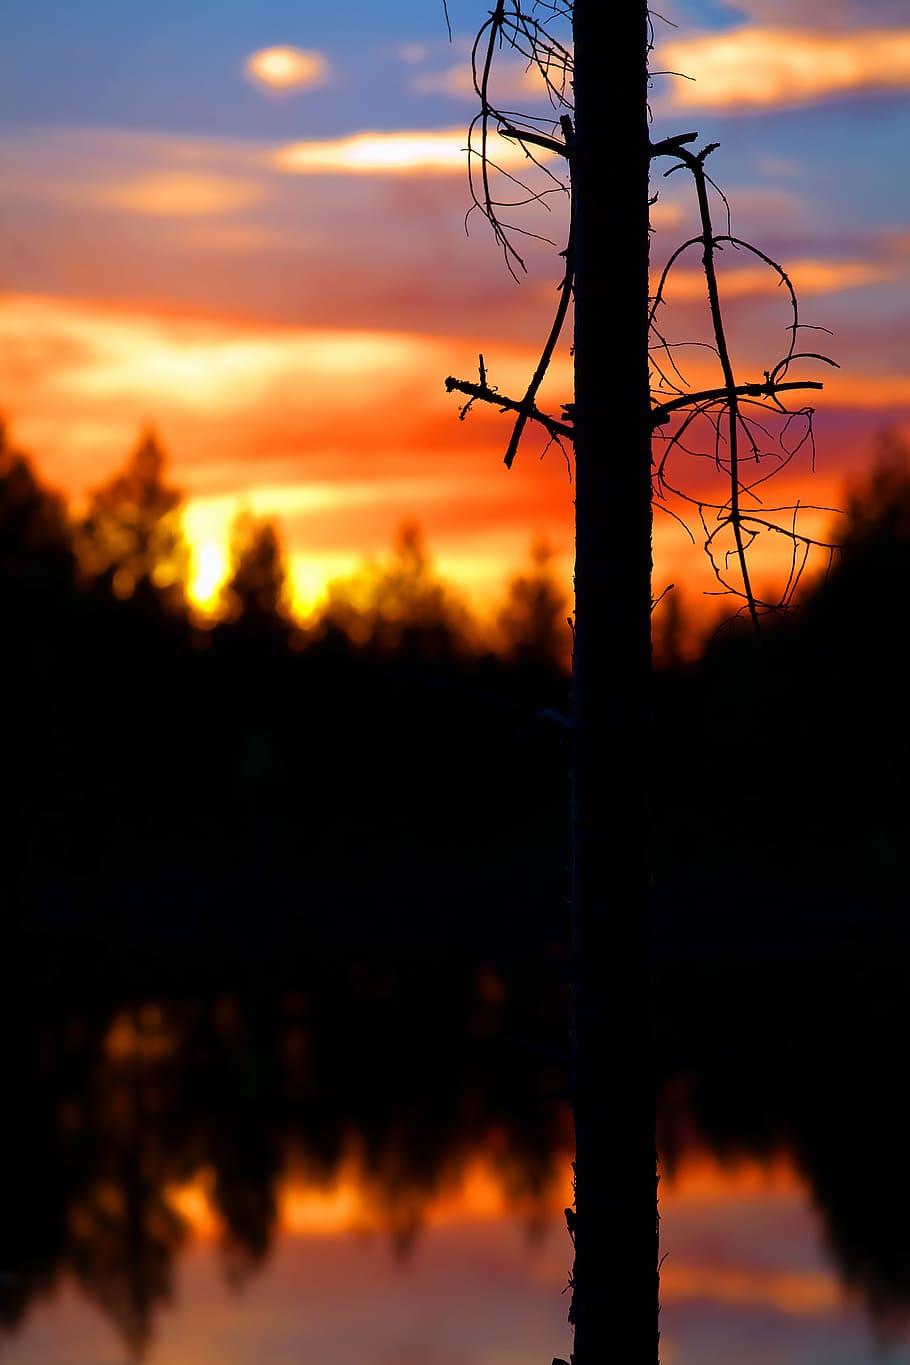 silhouette of tree, silhouette, tree, sunset, dusk, water, reflection, sky, trees, nature